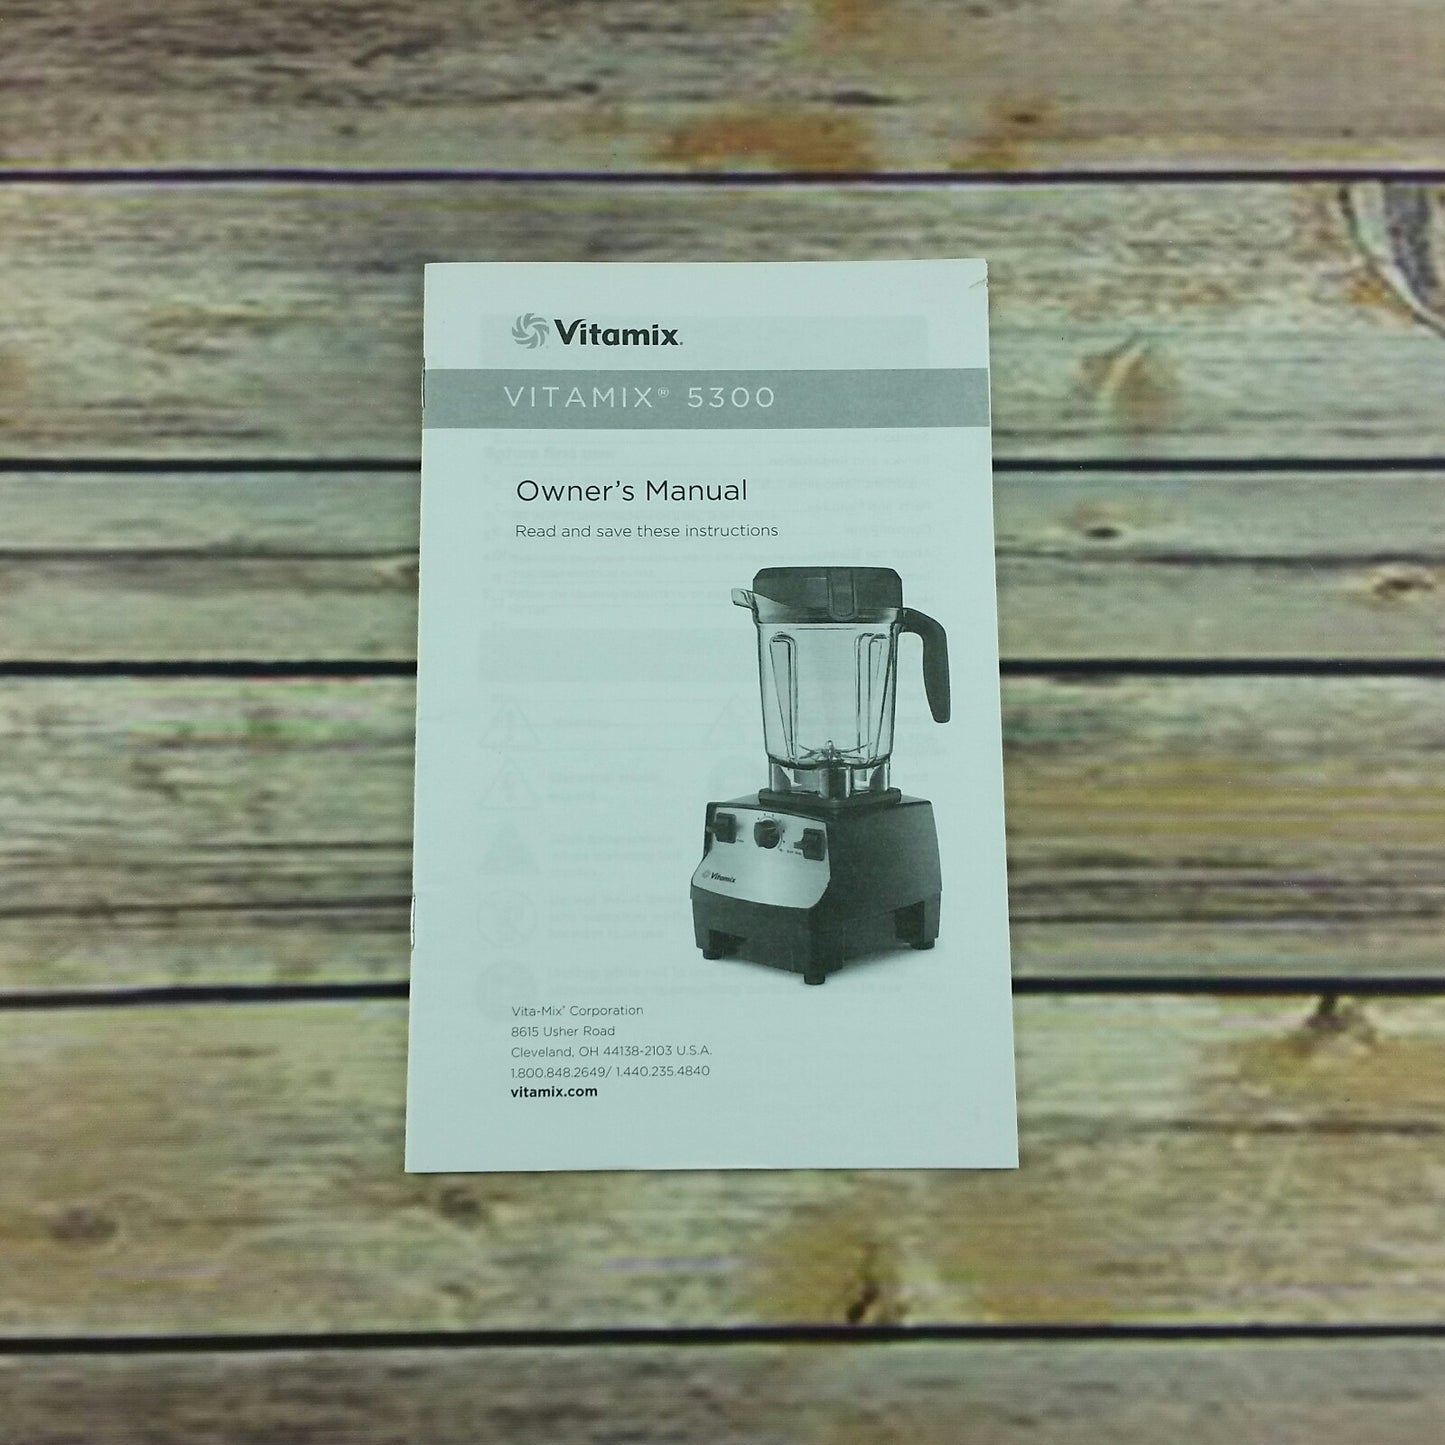 Vitamix 5300 Owners Manual Tips Instructions 2014 - At Grandma's Table